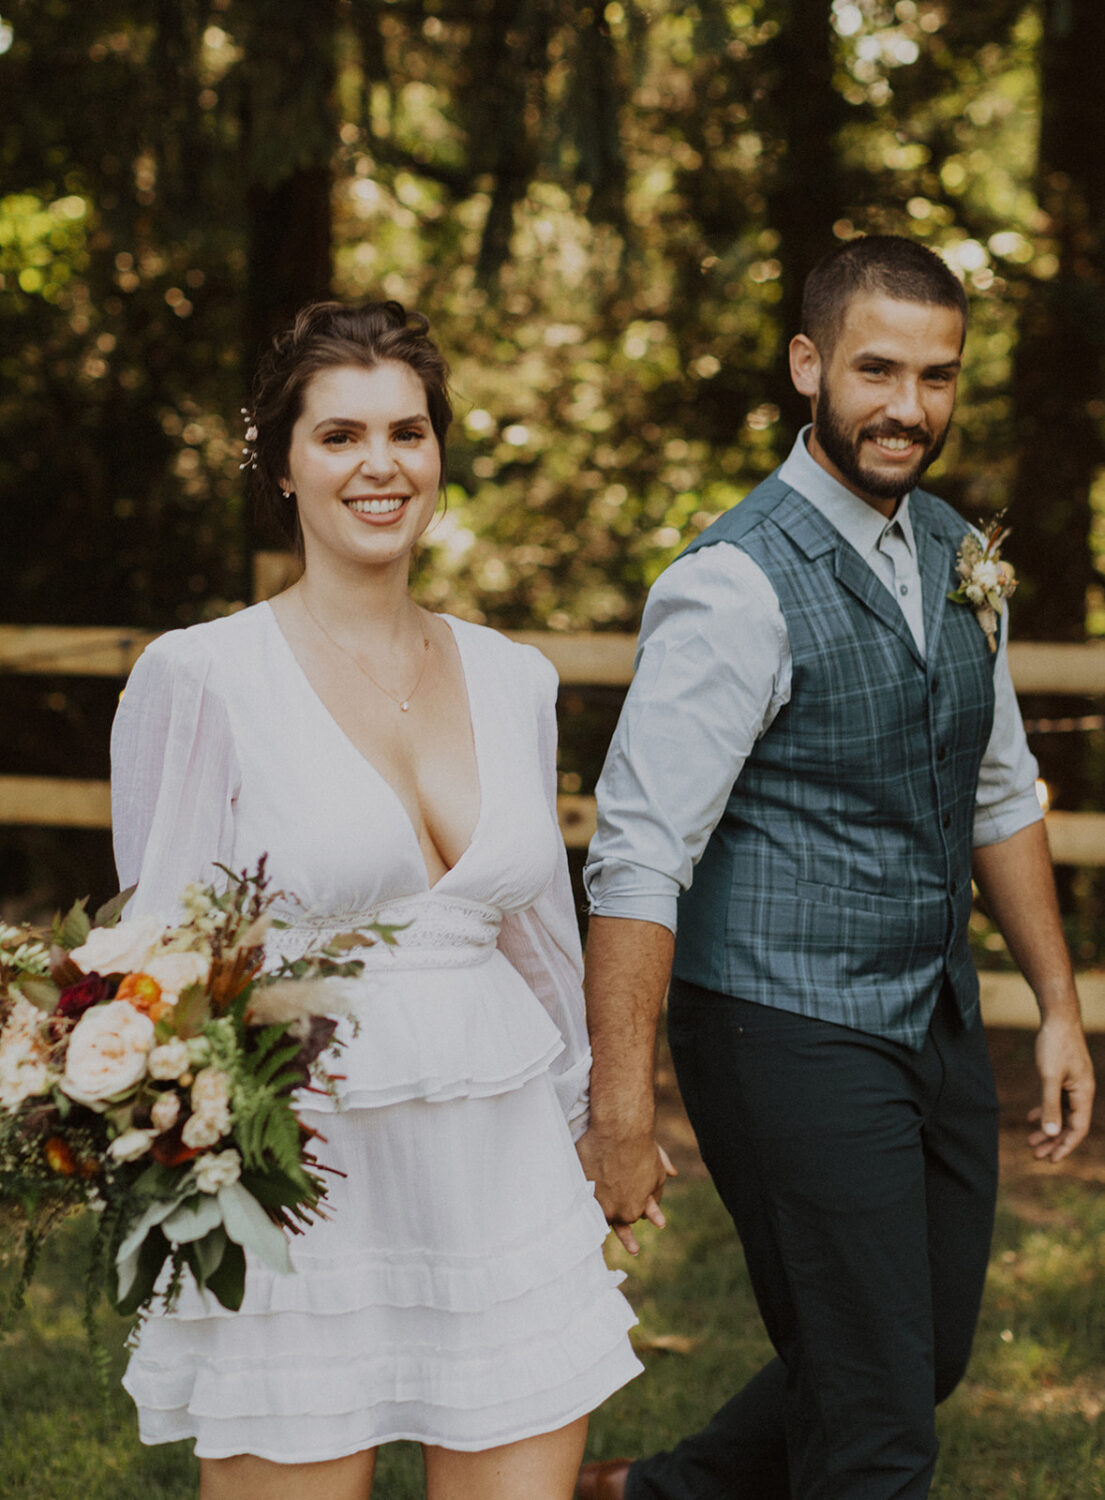 couple walks holding hands and bouquet in backyard 